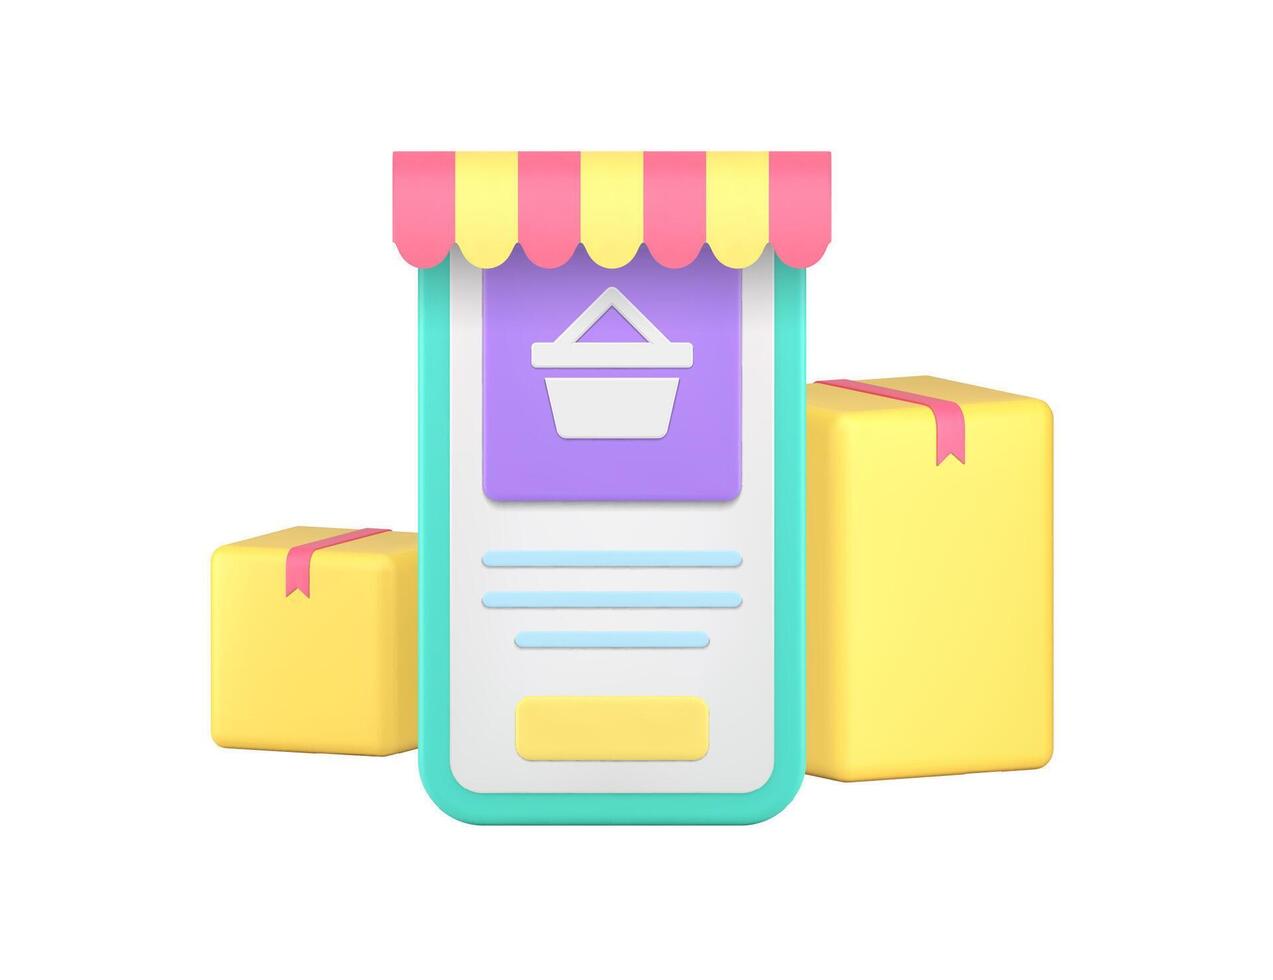 Online shopping marketplace order delivery service smartphone application 3d icon realistic vector